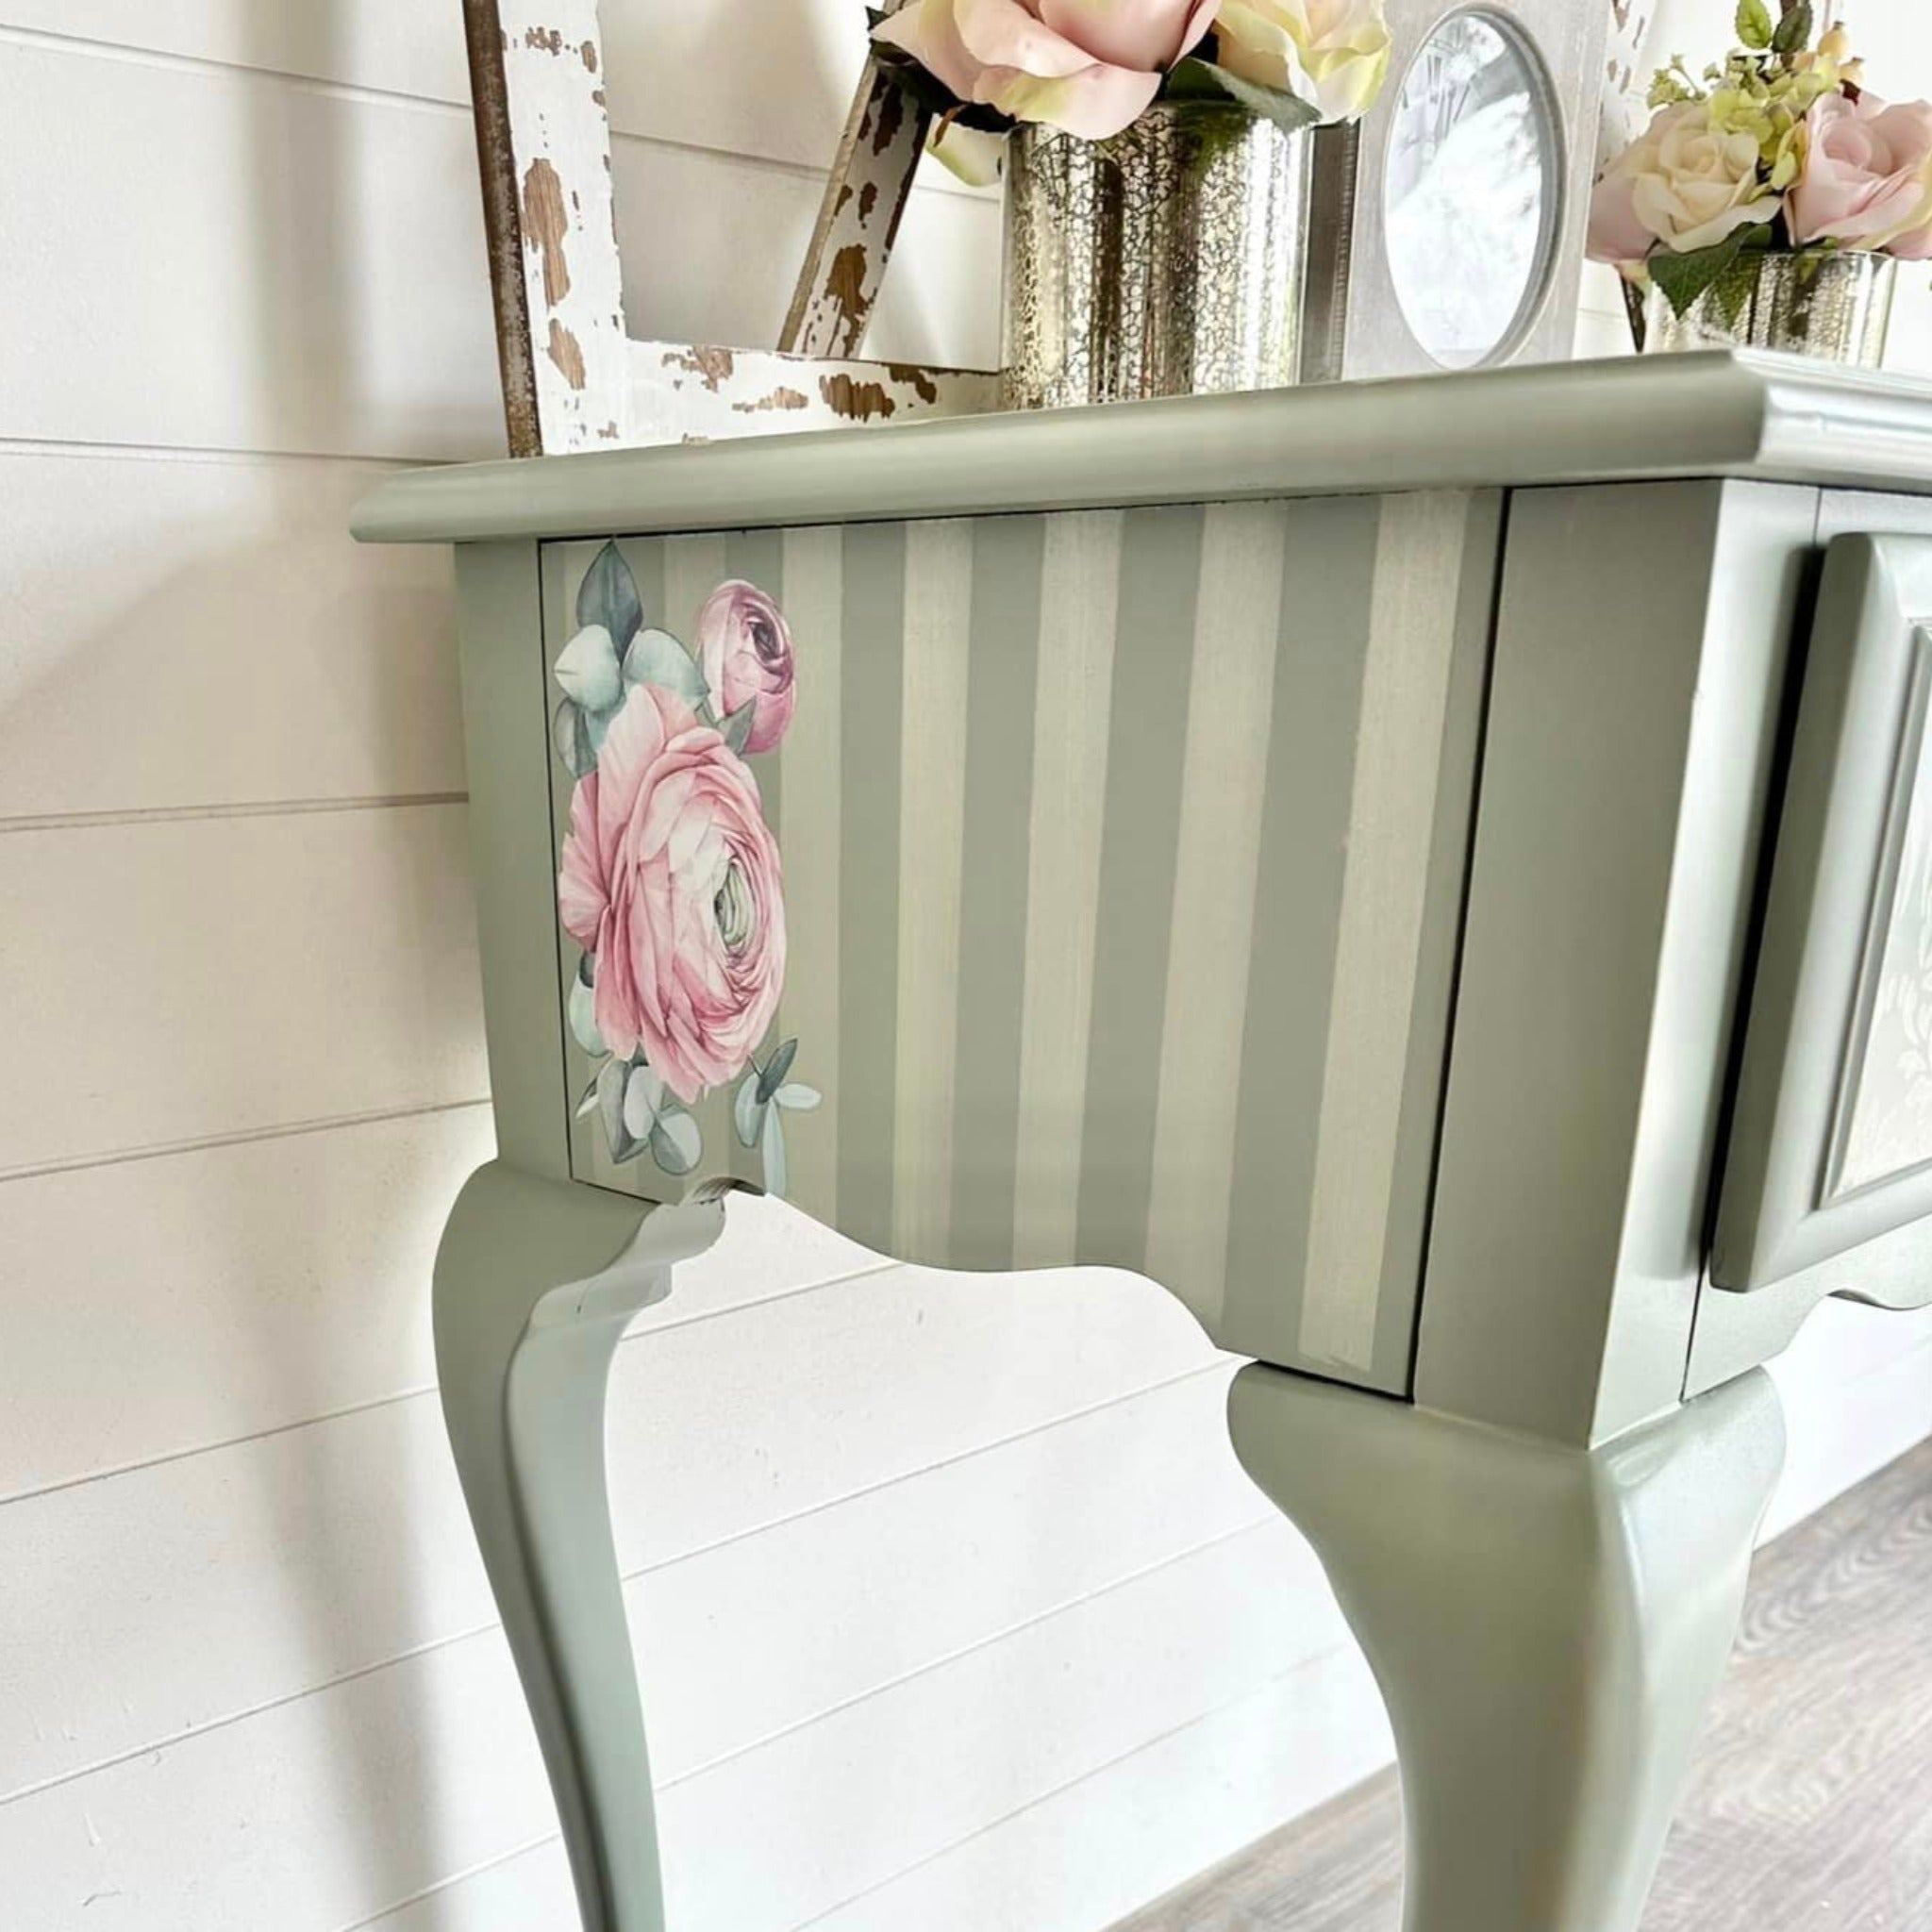 A close-up view of a vintage vanity desk refurbished by The Shabby Pearl is painted light sage green and features ReDesign with Prima's Overflowing Love transfer on the side panel.